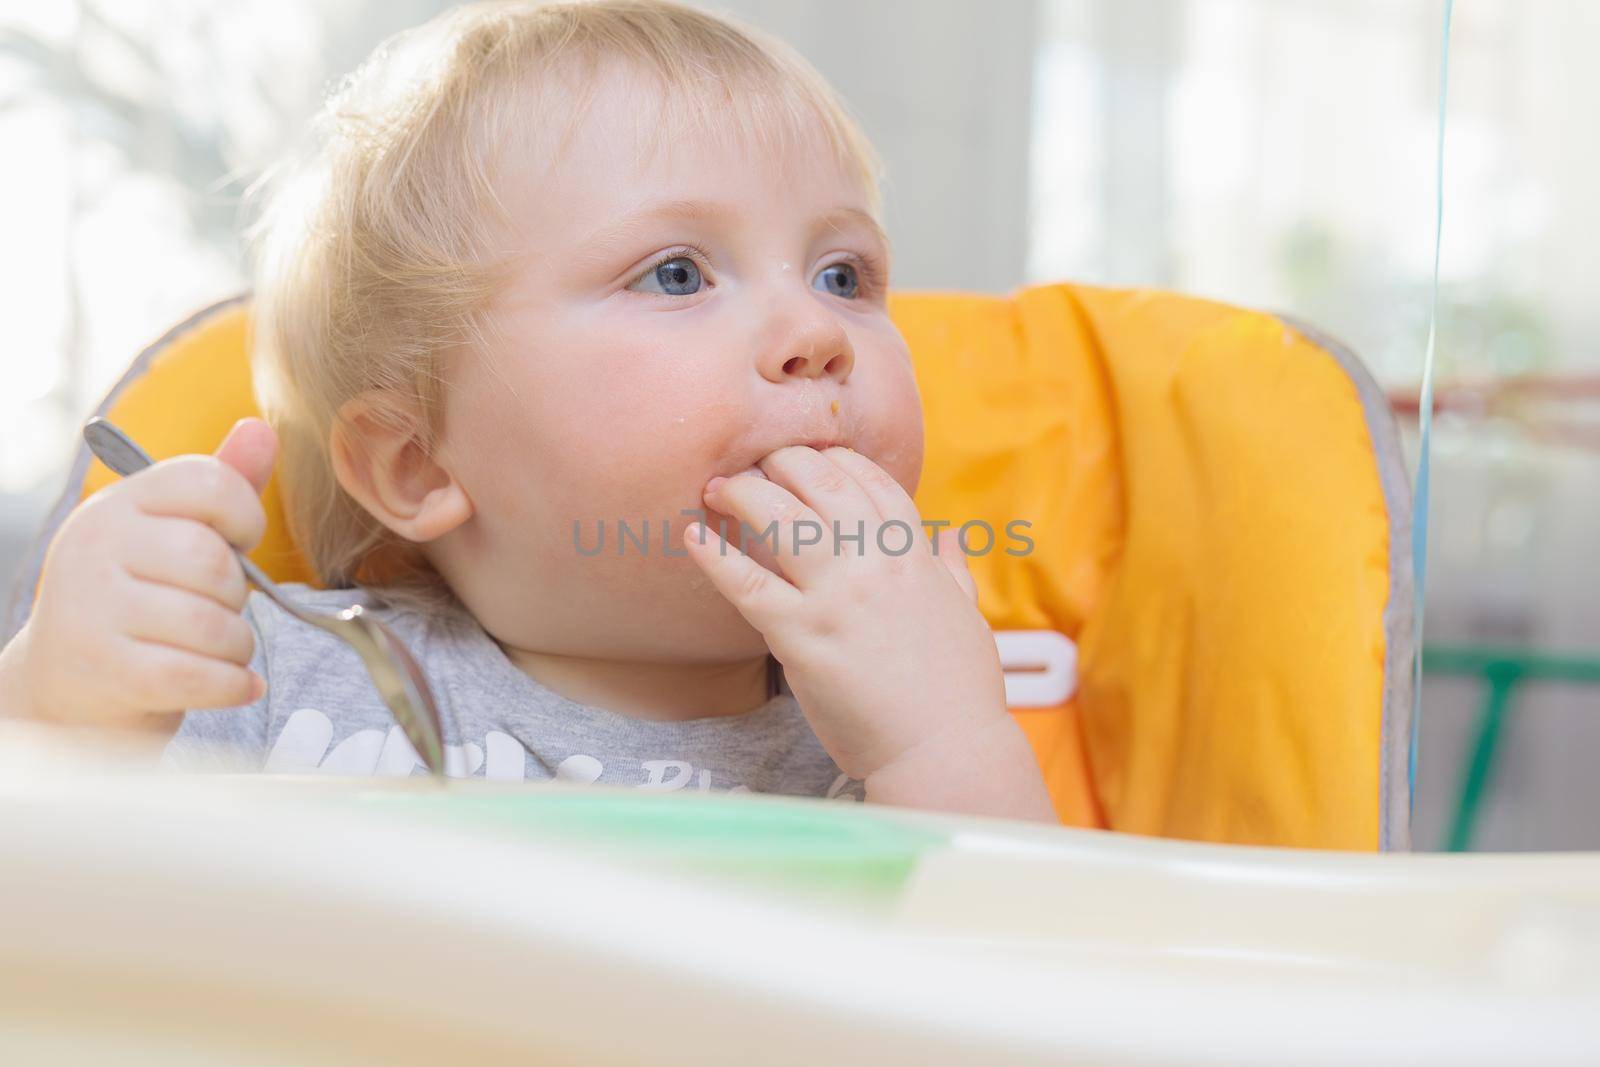 Little child sits on a high chair and eats with a spoon by Yurich32